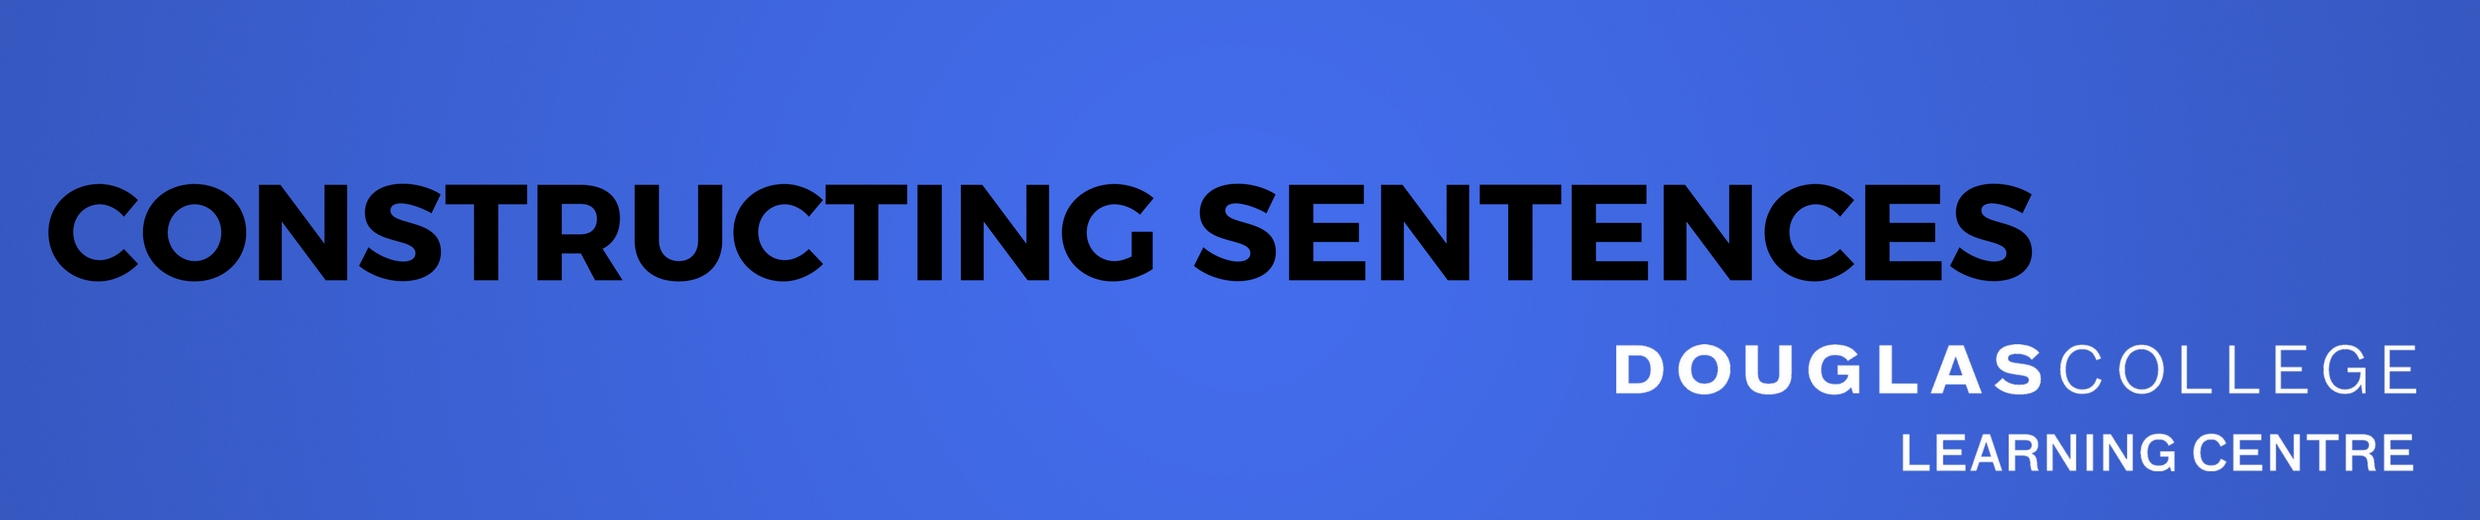 Constructing Sentences page banner